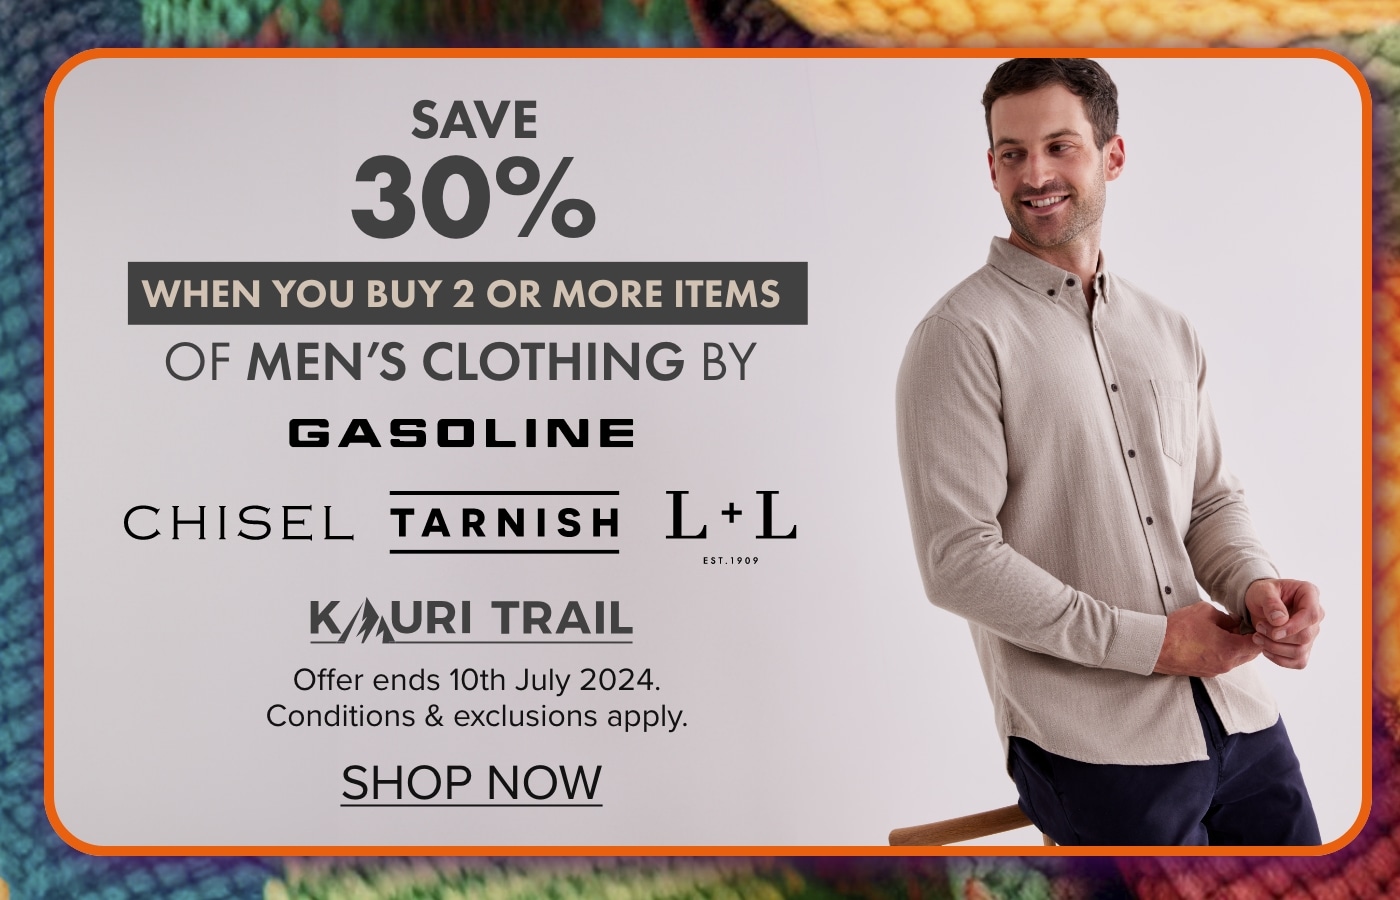  Save 30% when you buy any 2 or more items of Men's Clothing by Gasoline, Tarnish, Chisel, Kauri Trail & L+L